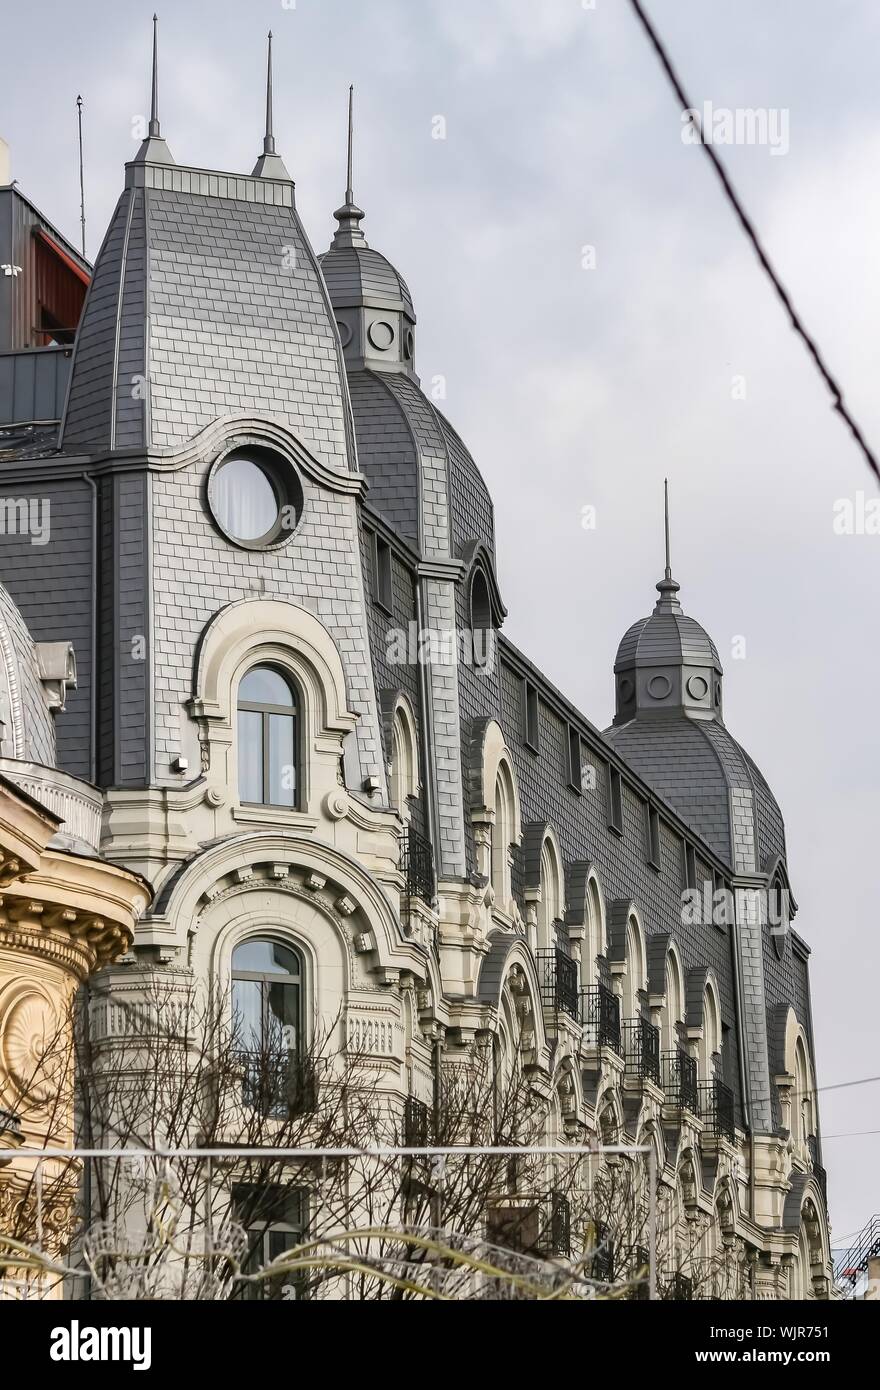 Bucharest, Romania - November 15, 2018: The beautiful building of the Cismigiu Hotel, built in 1912, where The Gambrinus Beer House is located on the Stock Photo